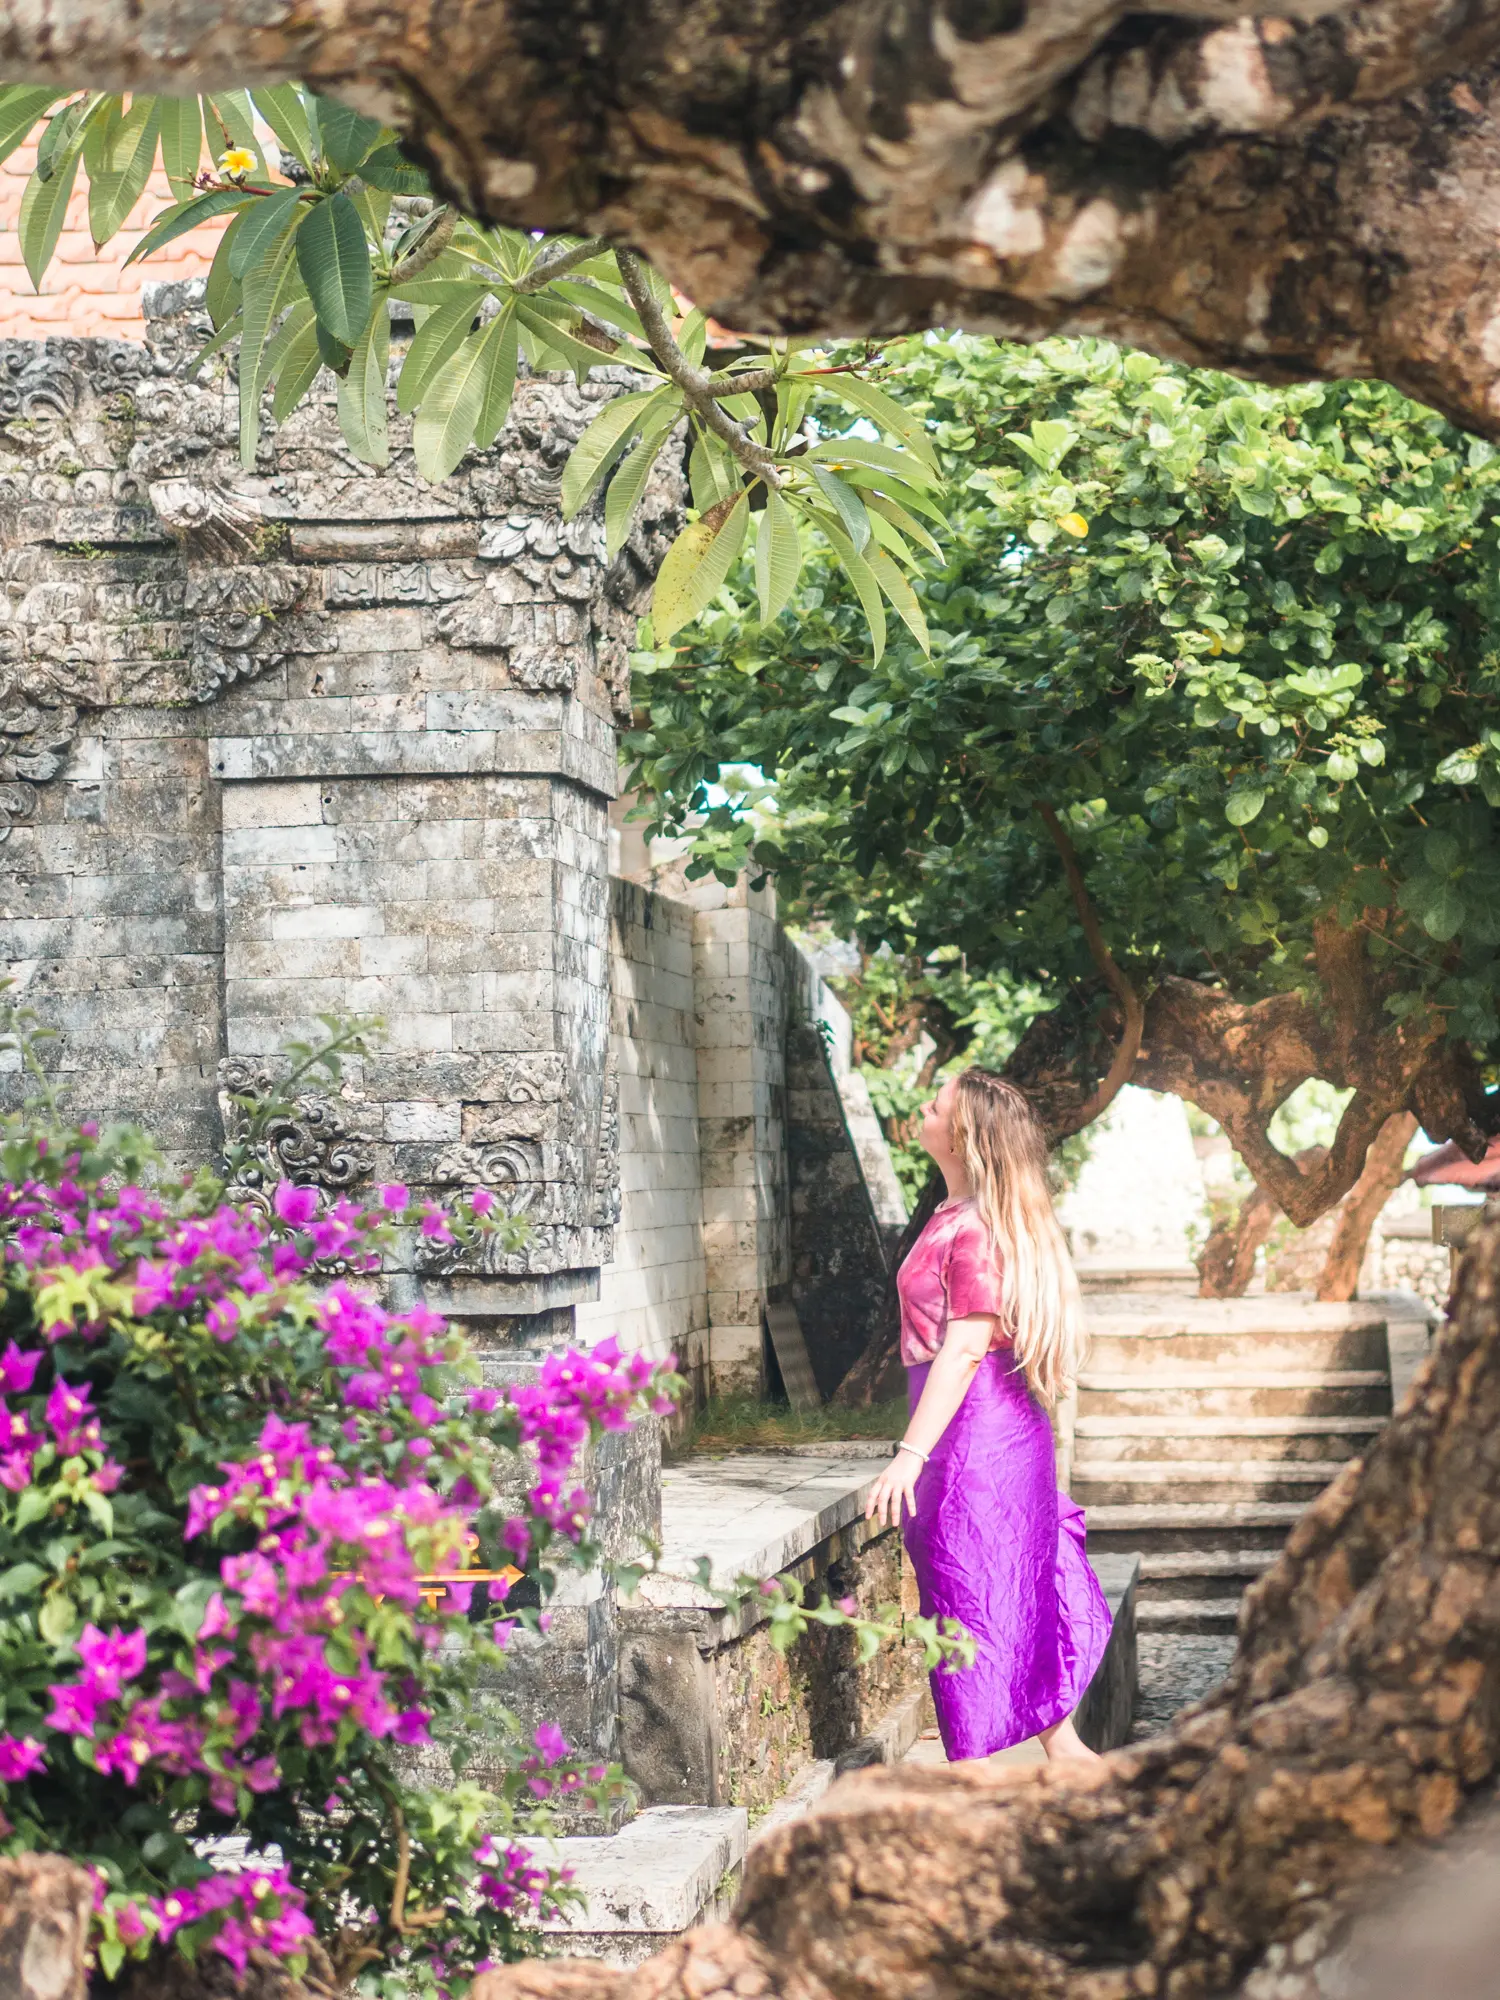 Girl with long hair wearing a purple sarong looking at a grey stone temple in Uluwatu surrounded by purple flowers and green trees.